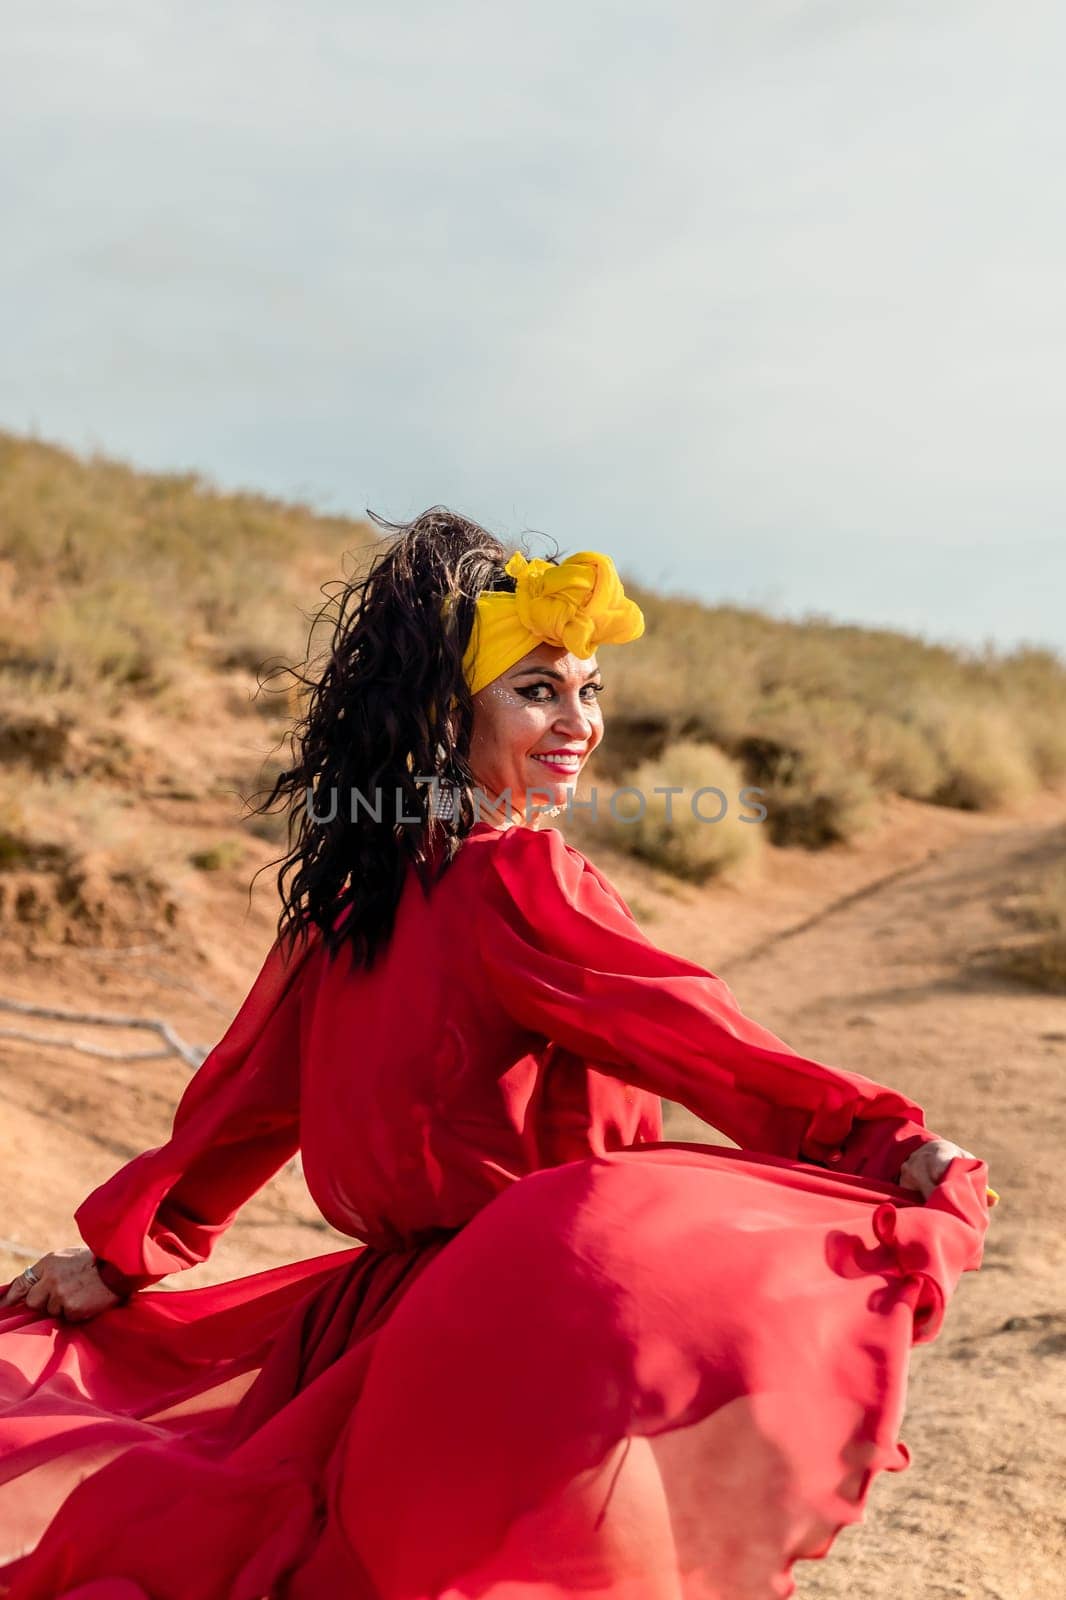 A woman in a red dress and yellow headband is walking on a dirt path. She is smiling and she is happy. by Matiunina